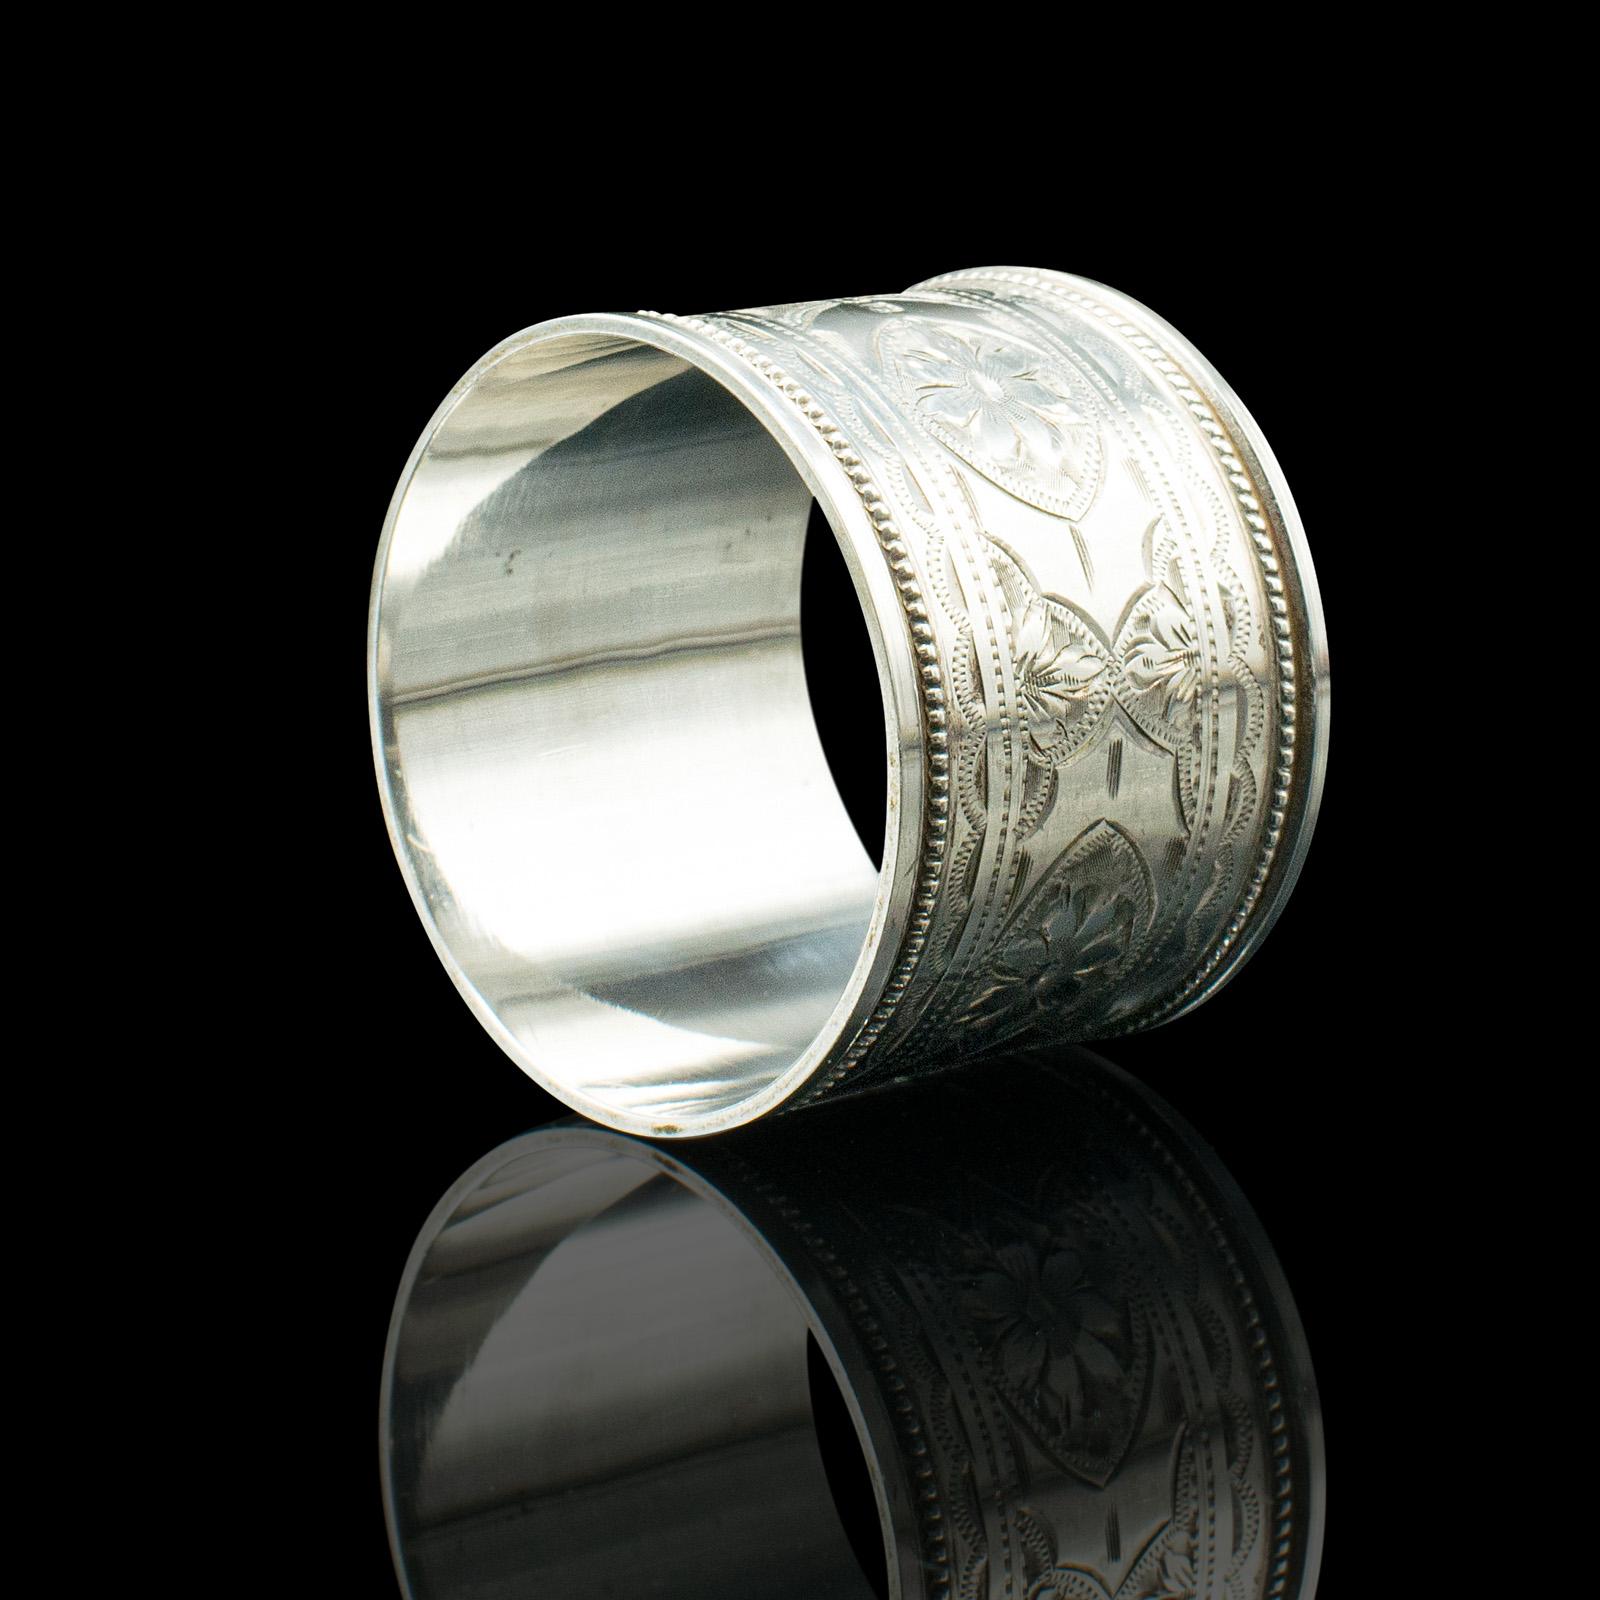 Antique Napkin Ring, English Sterling Silver, Table Decor, Hallmarked, Date 1922 For Sale 2